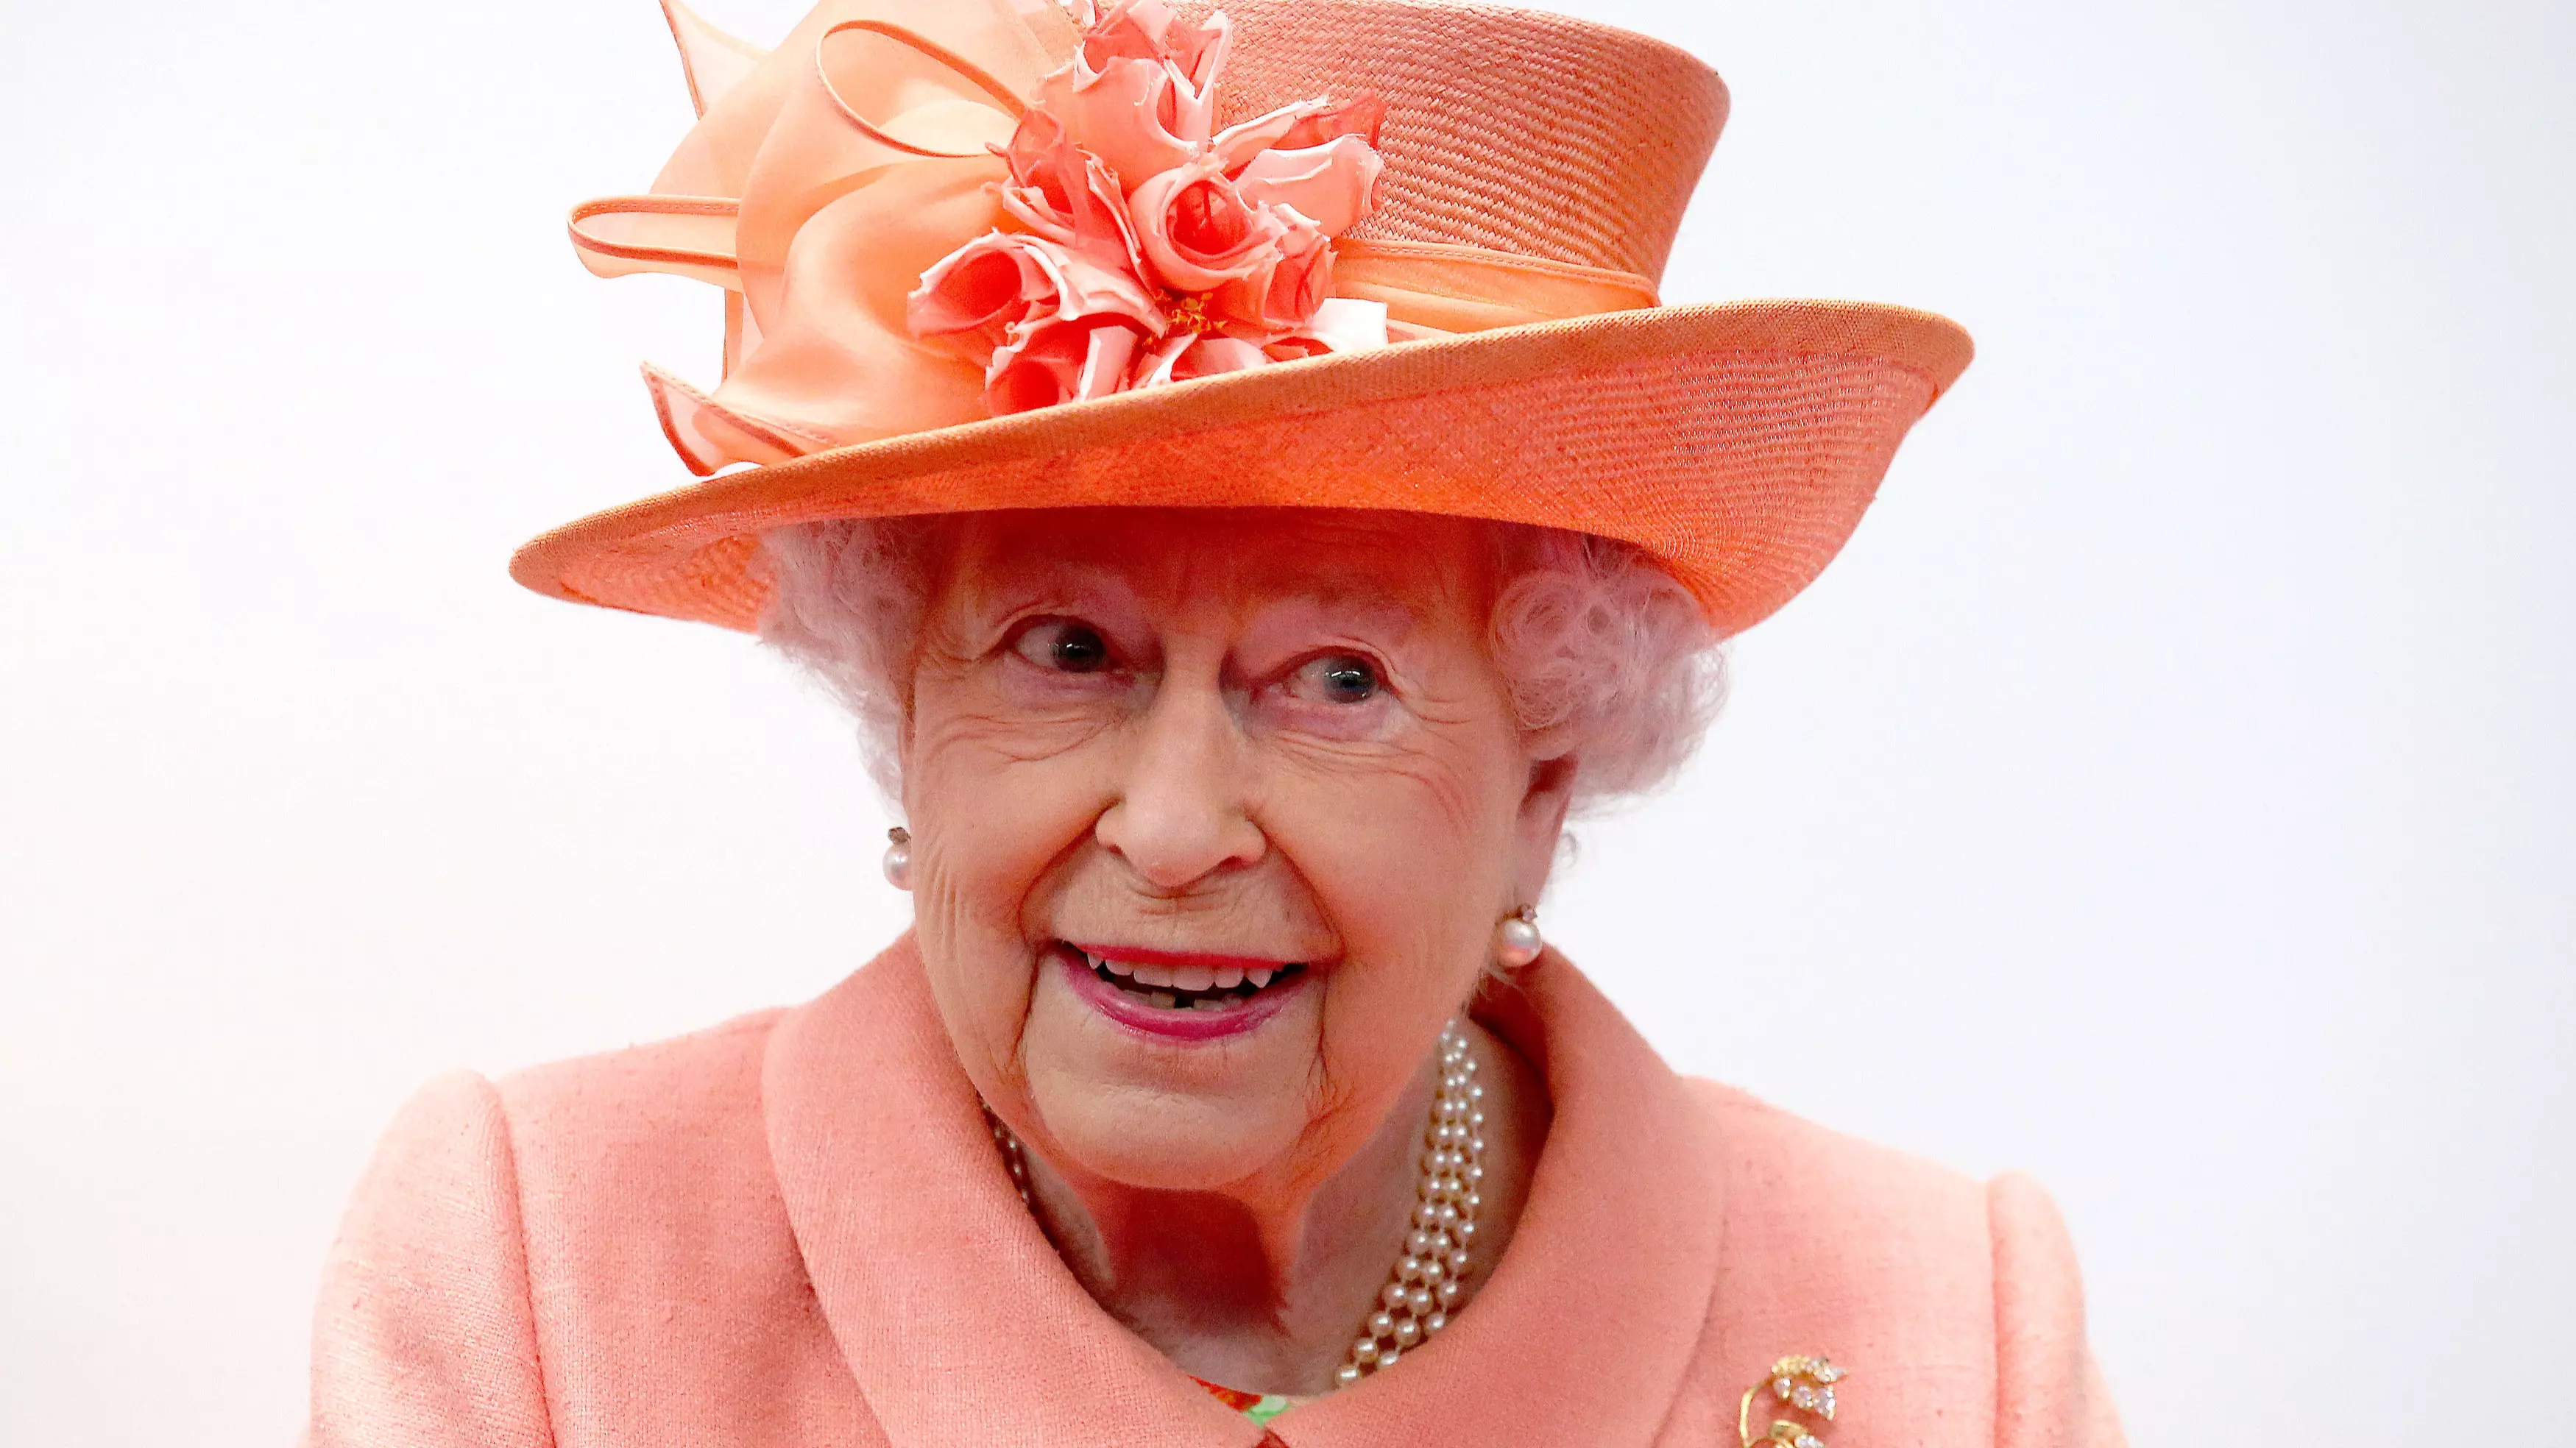 There's A Surprising European Country That The Queen Has Never Visited